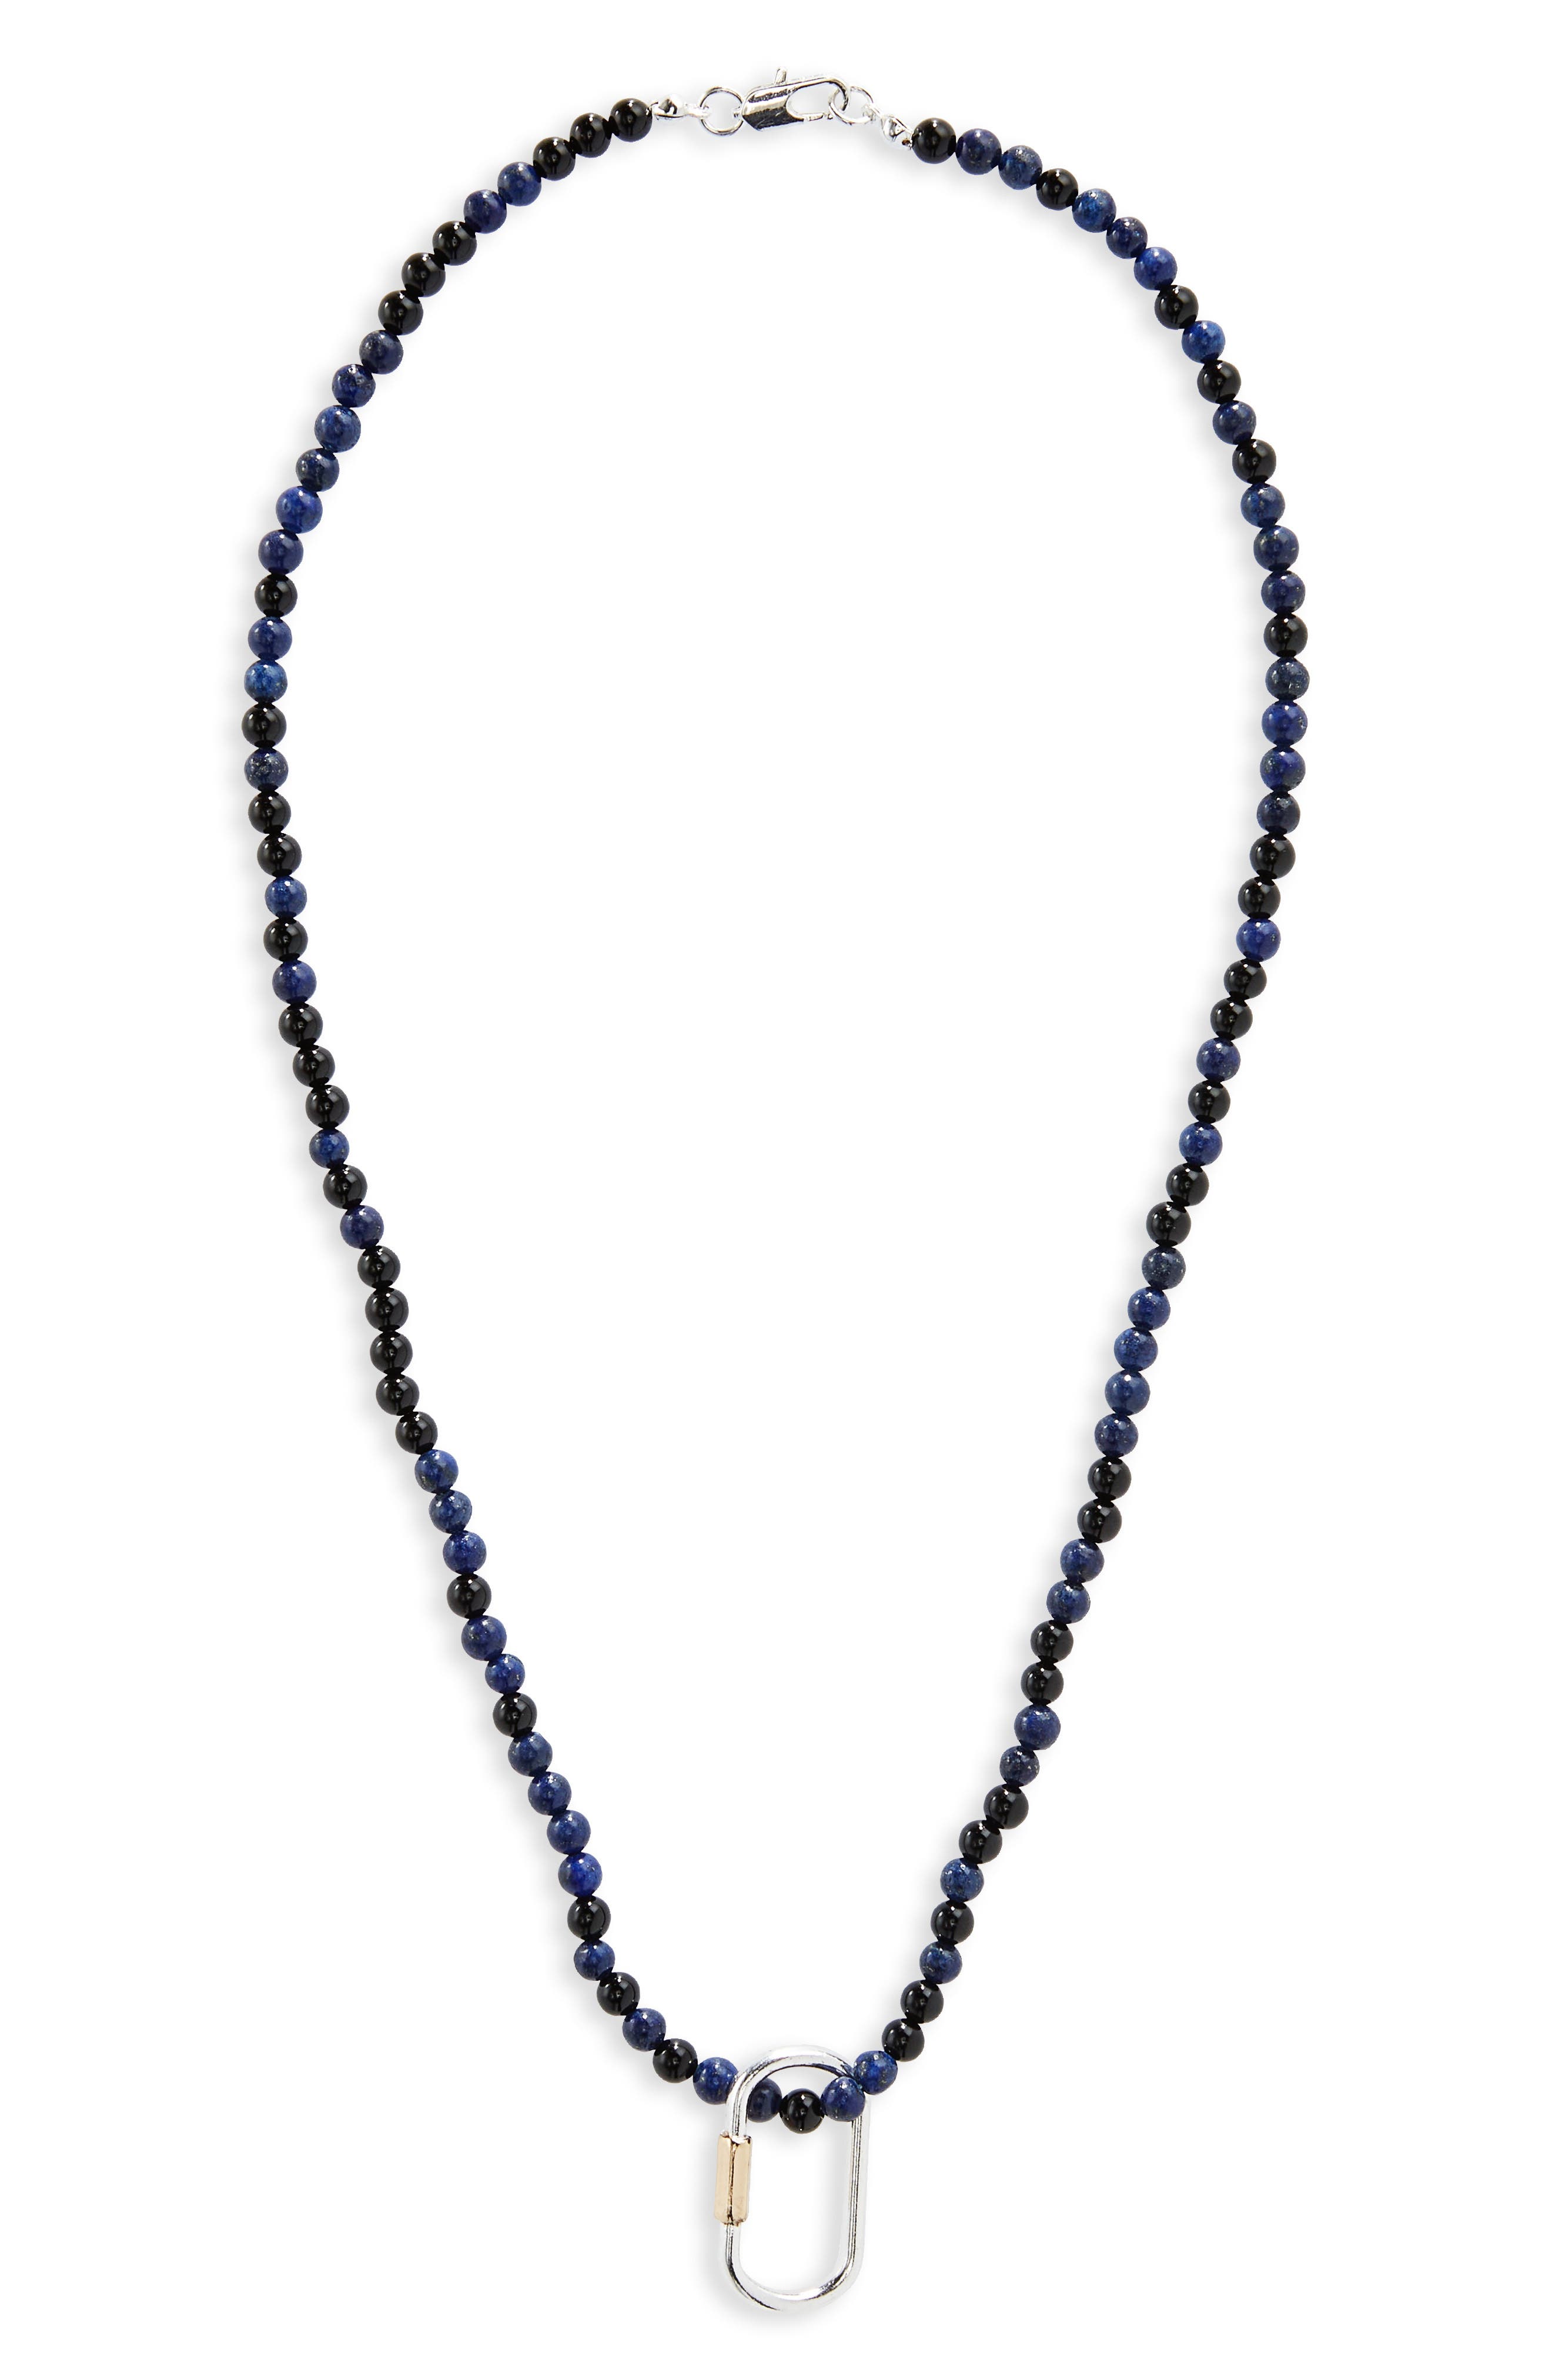 32" LONG BEADED BEIGE BLUE RED BEADS WITH TASSEL PENDANT necklace 